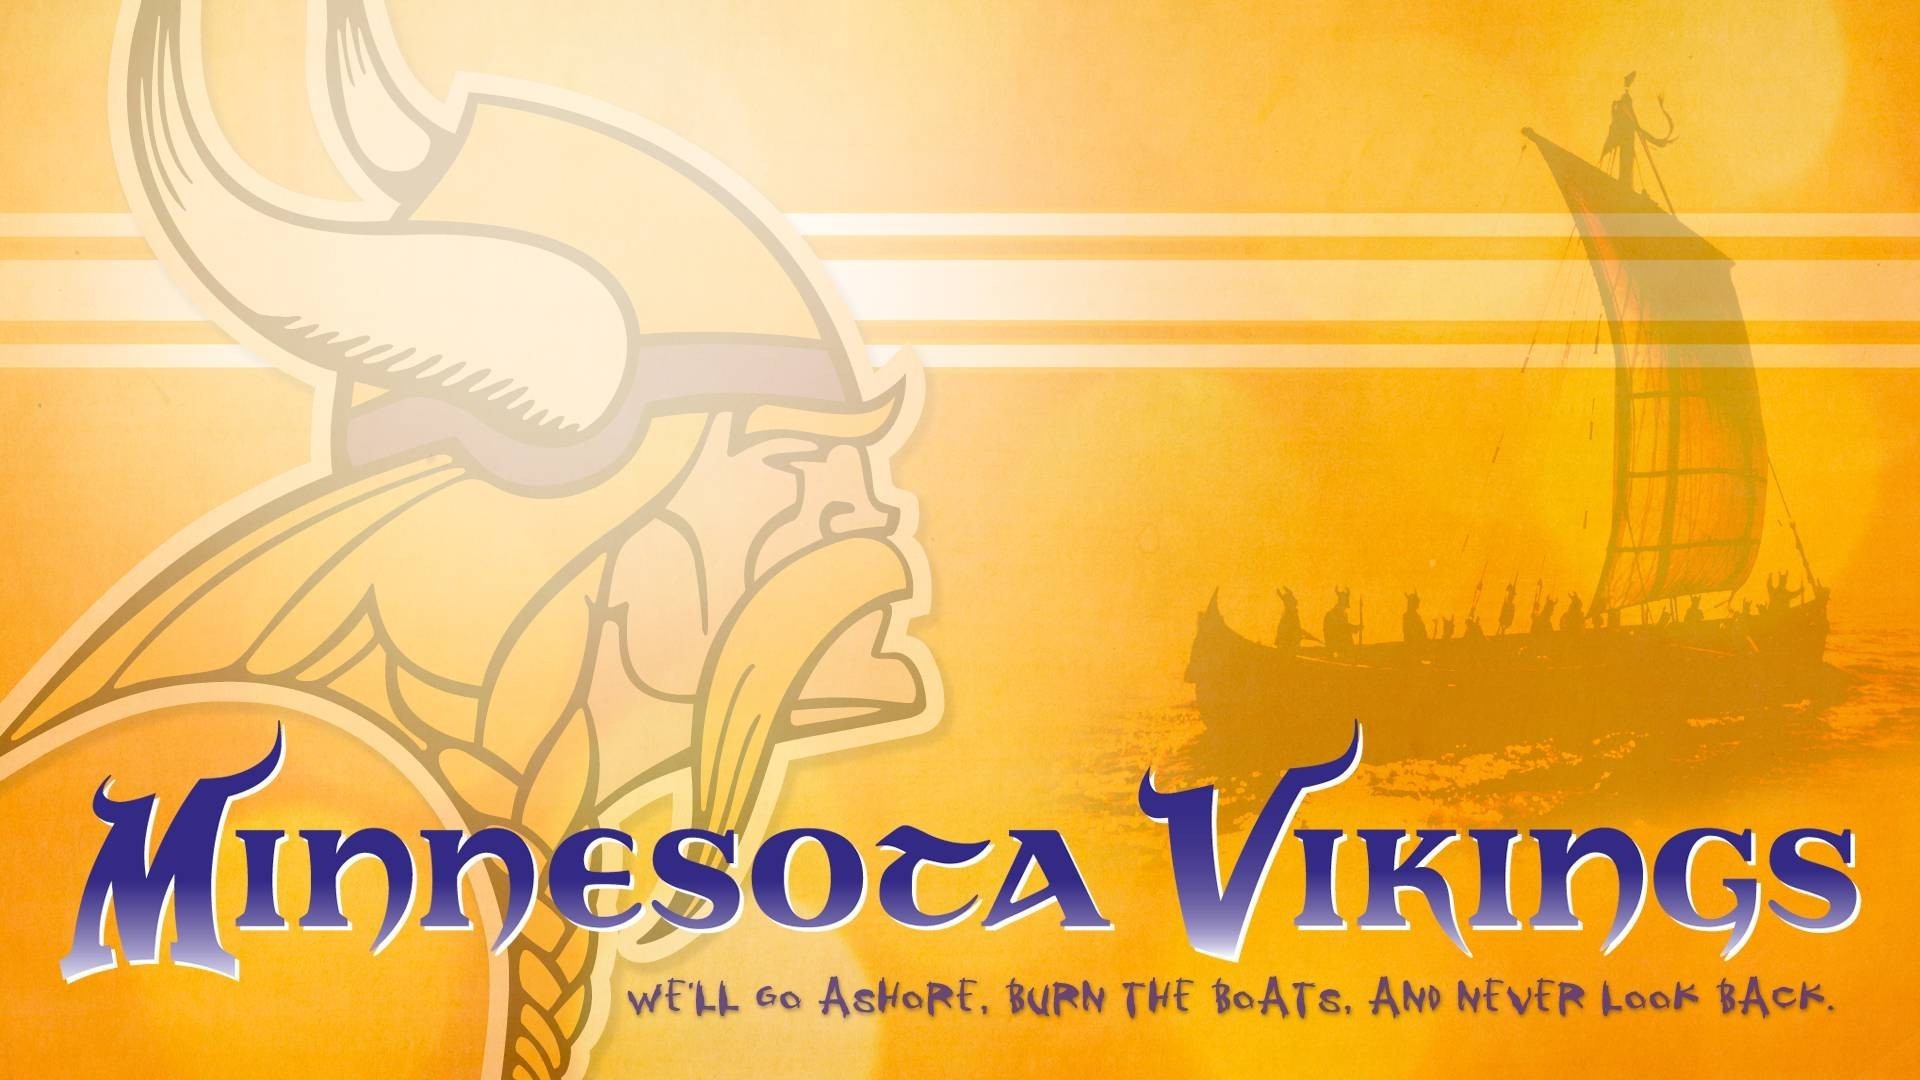 Minnesota Vikings Mac Wallpaper With high-resolution 1920X1080 pixel. Download and set as wallpaper for Desktop Computer, Apple iPhone X, XS Max, XR, 8, 7, 6, SE, iPad, Android